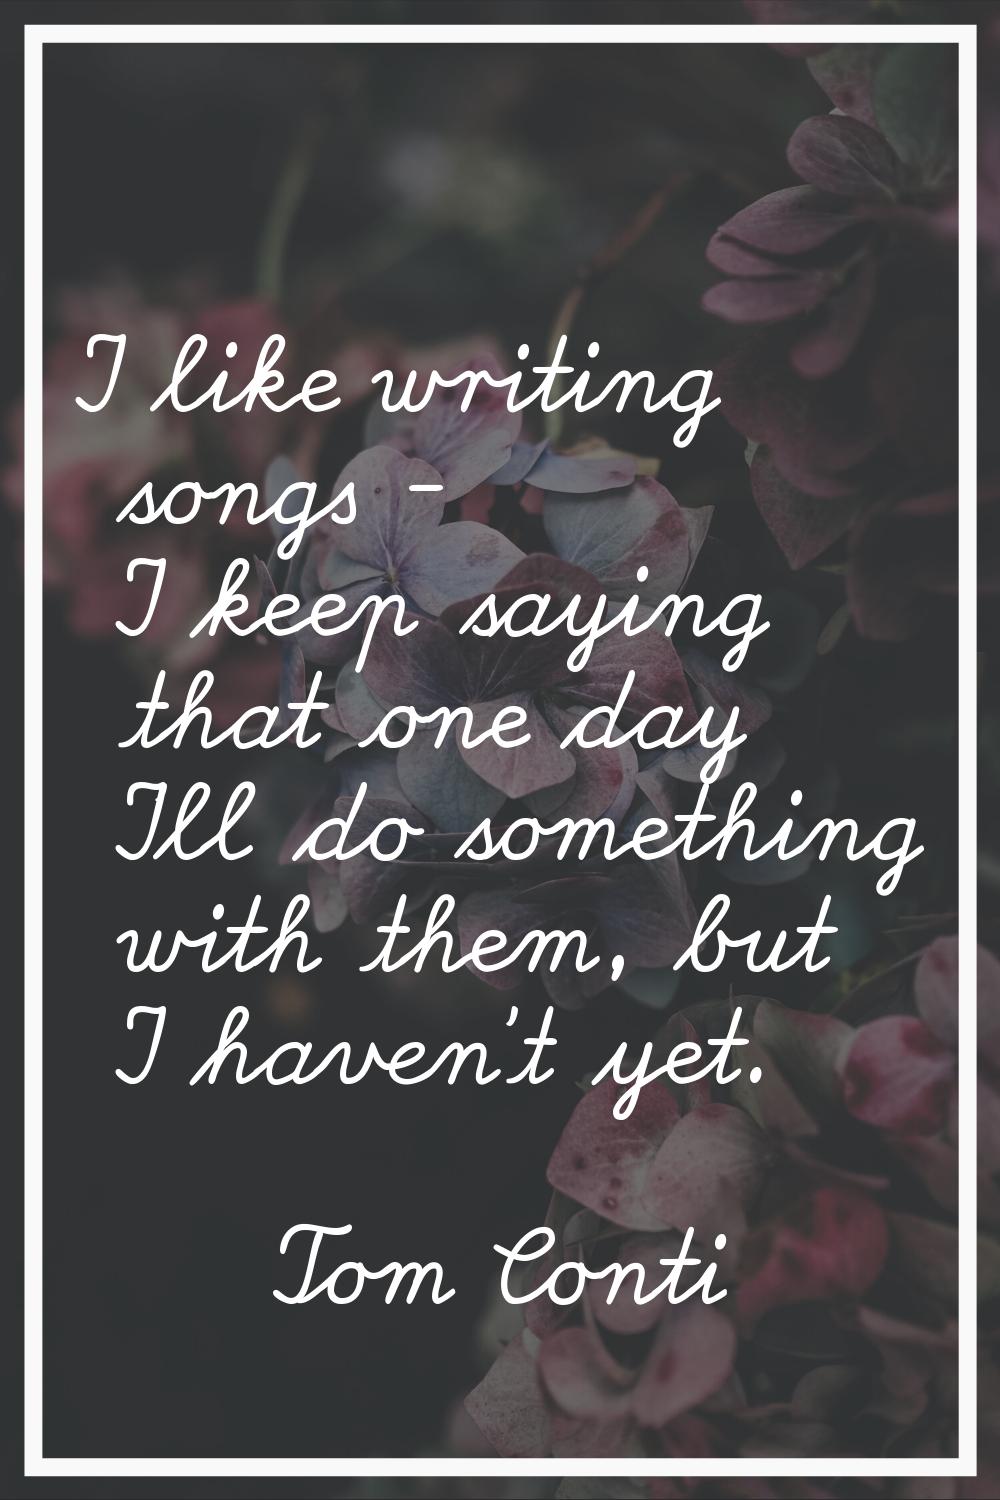 I like writing songs - I keep saying that one day I'll do something with them, but I haven't yet.